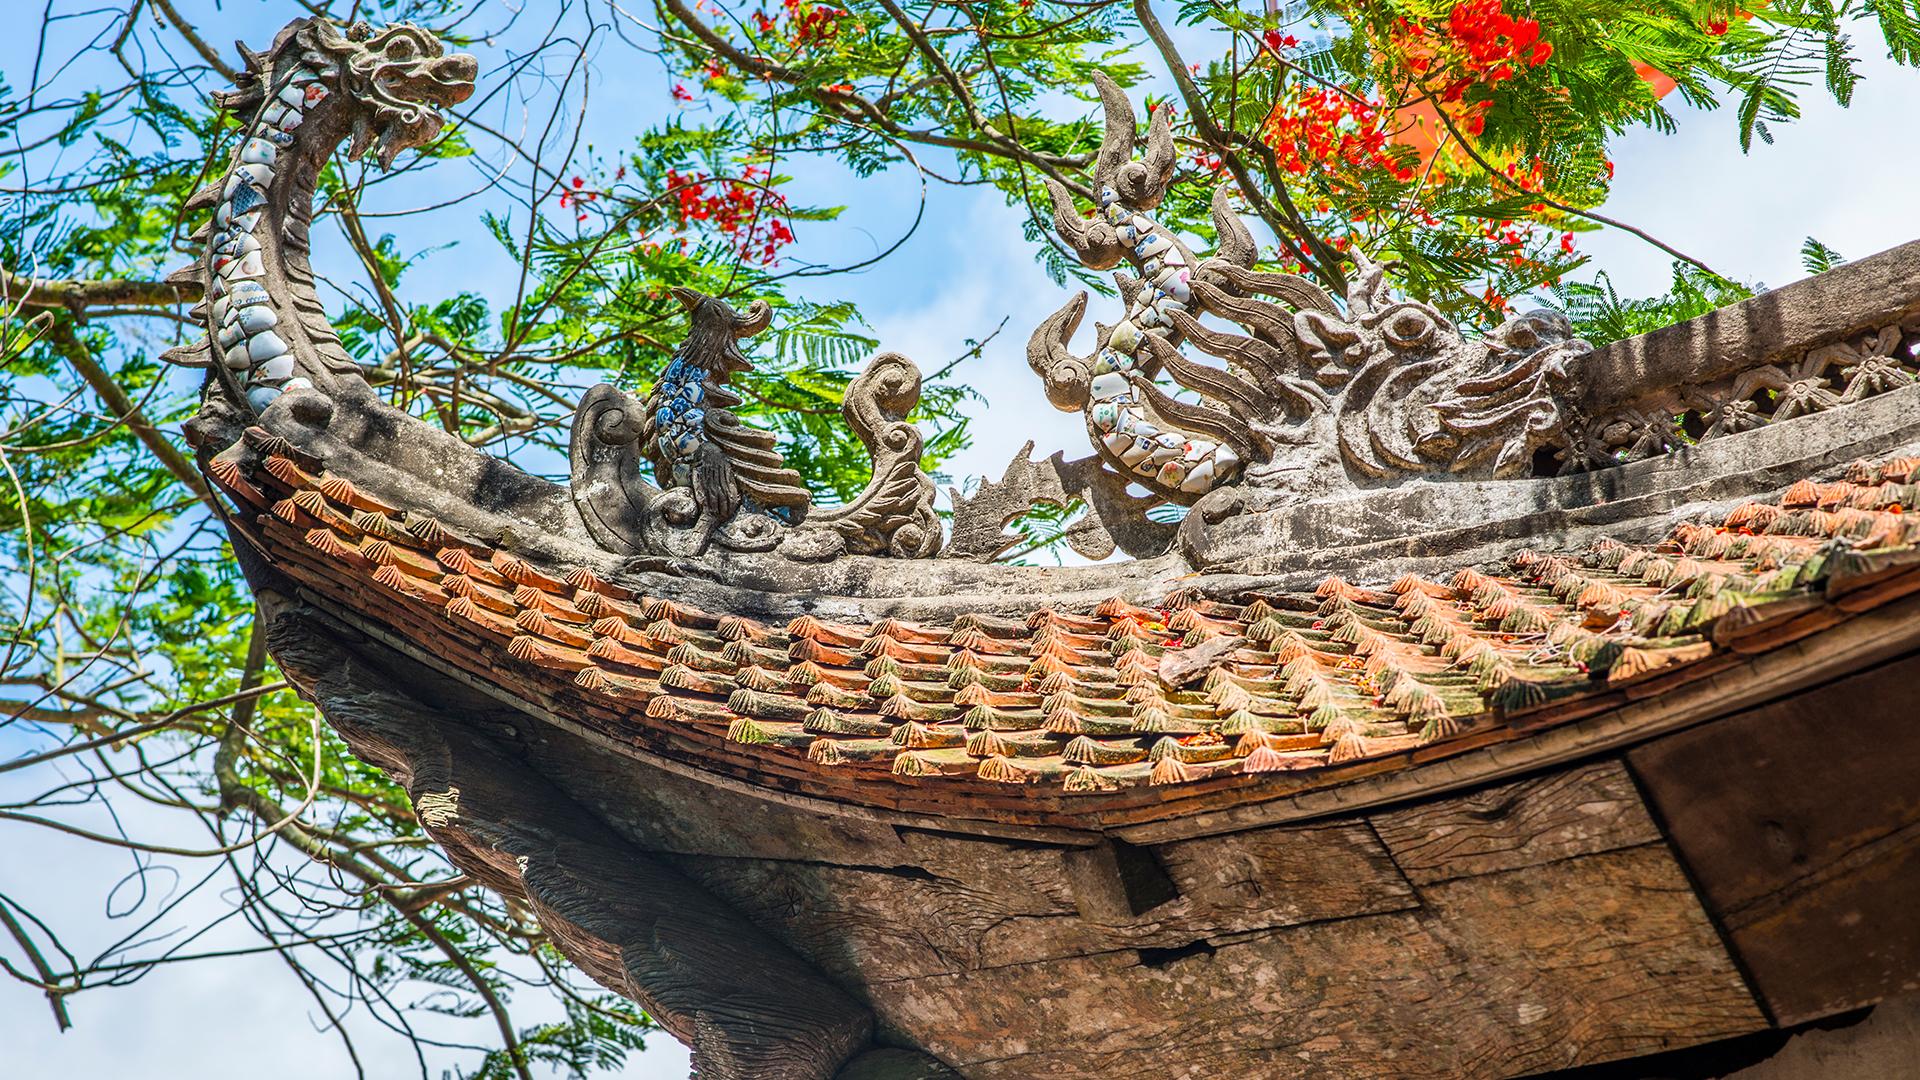 Discover local heritage and history in Quan Lan